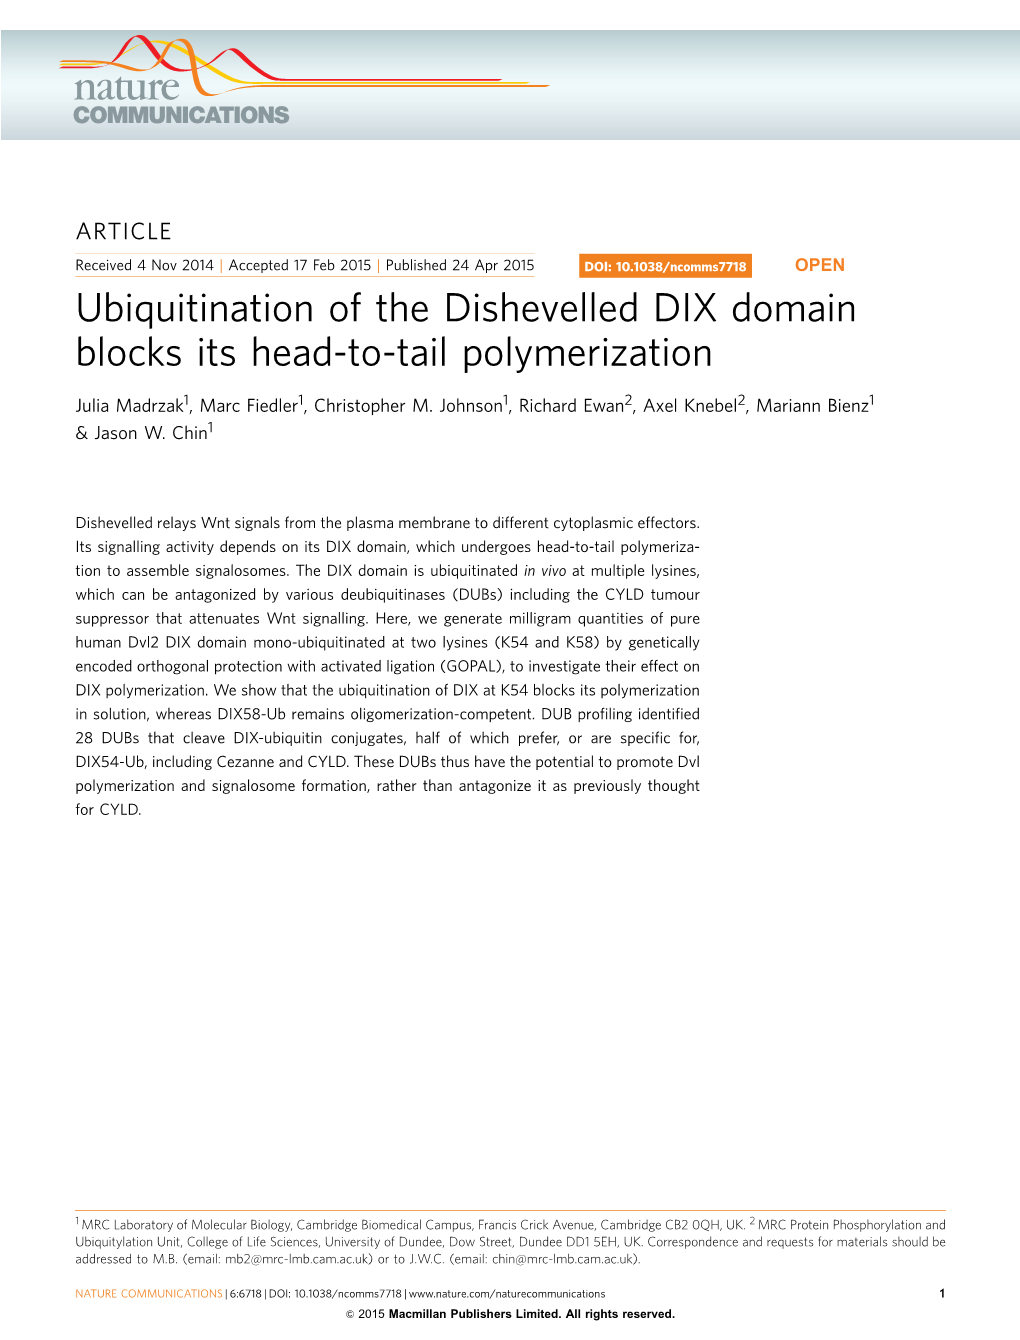 Ubiquitination of the Dishevelled DIX Domain Blocks Its Head-To-Tail Polymerization